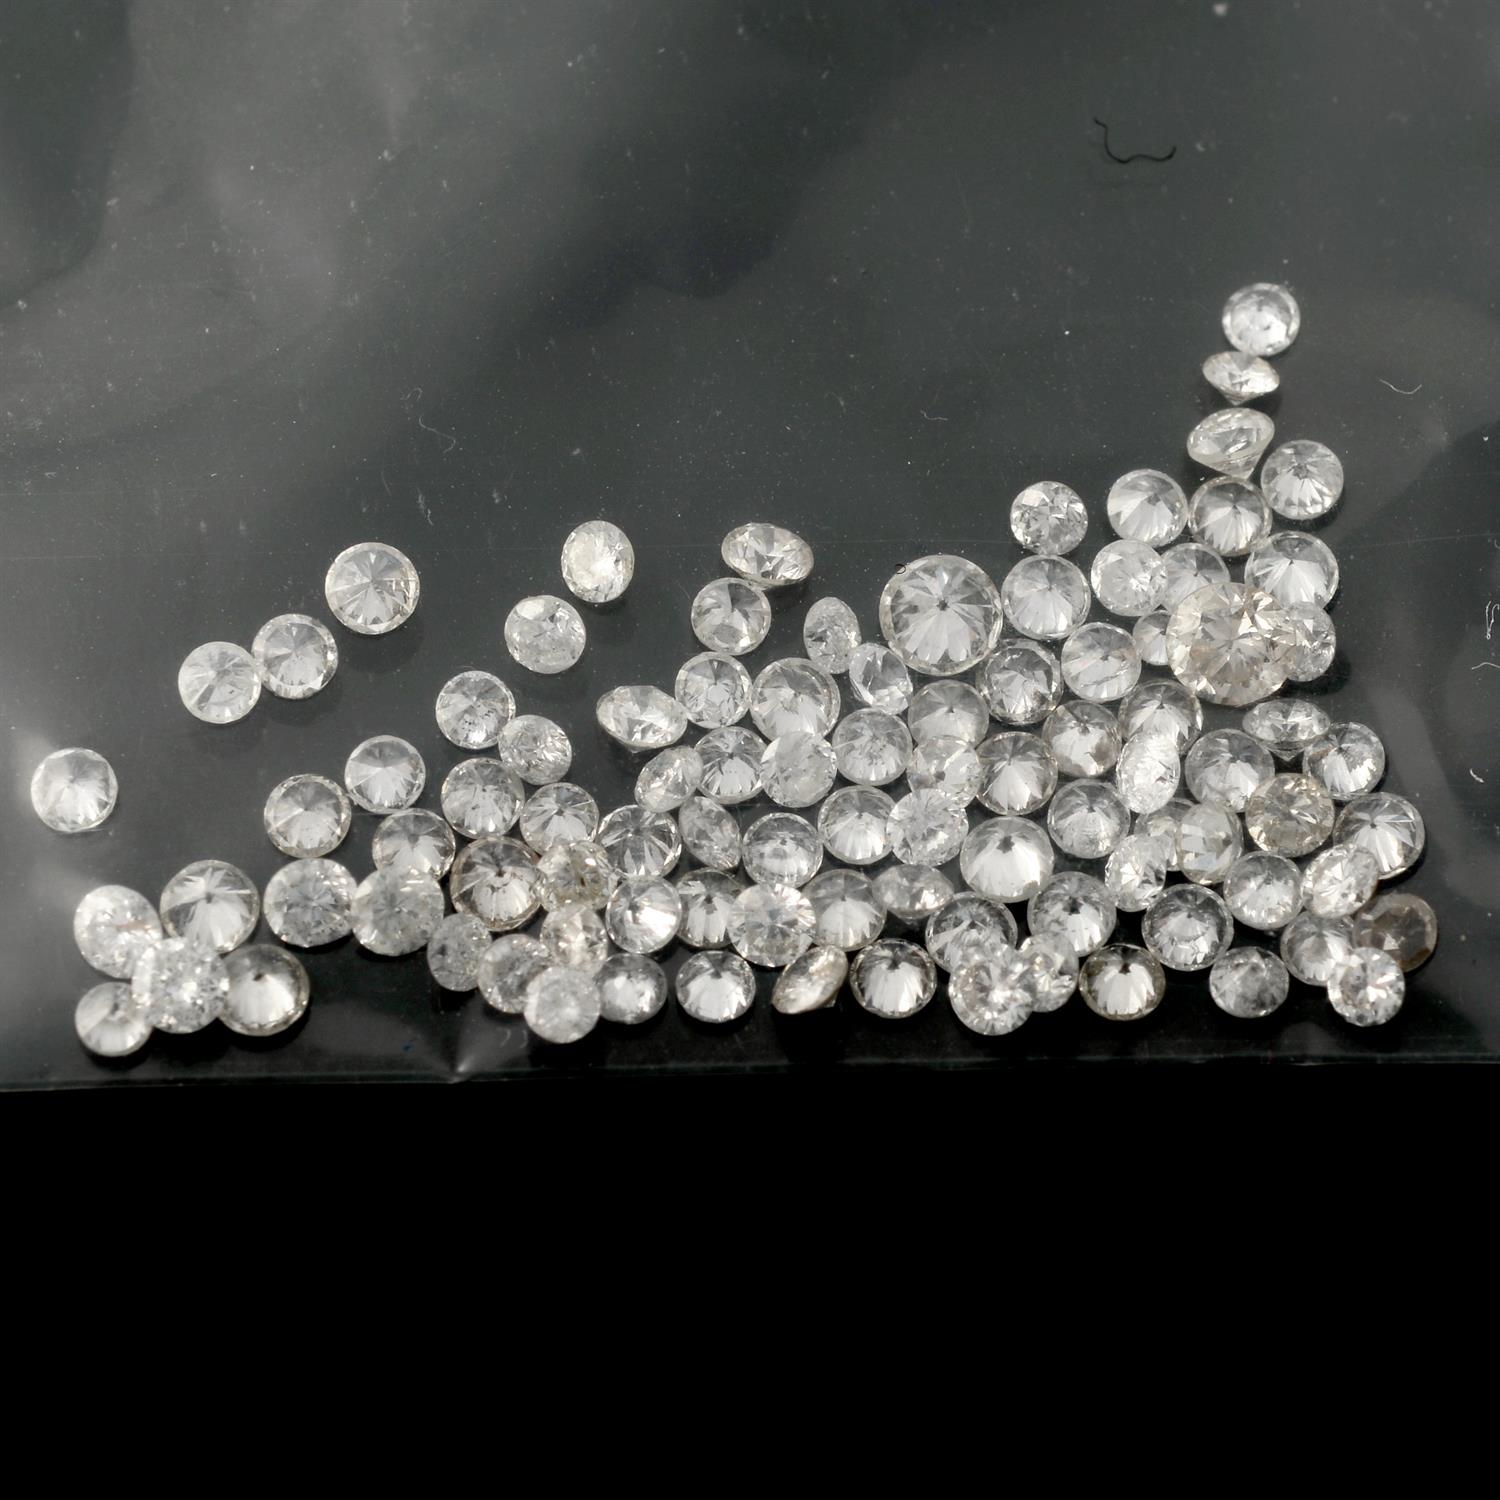 Selection of brilliant cut diamonds, weighing 3ct - Image 2 of 2